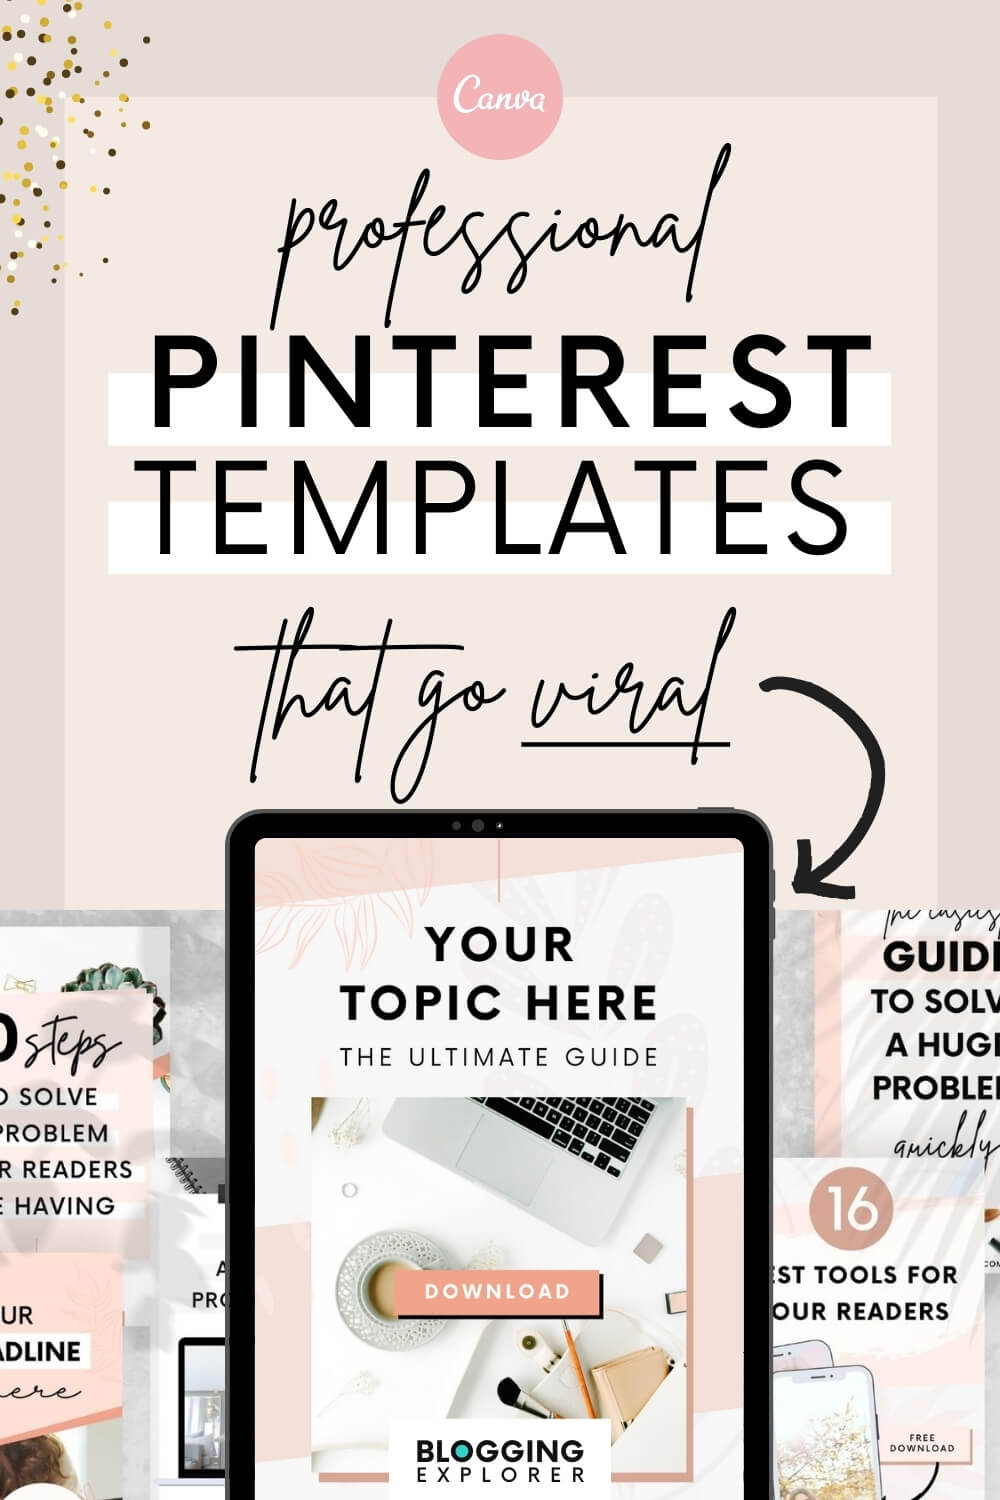 20 Viral Canva Pinterest Templates for Bloggers